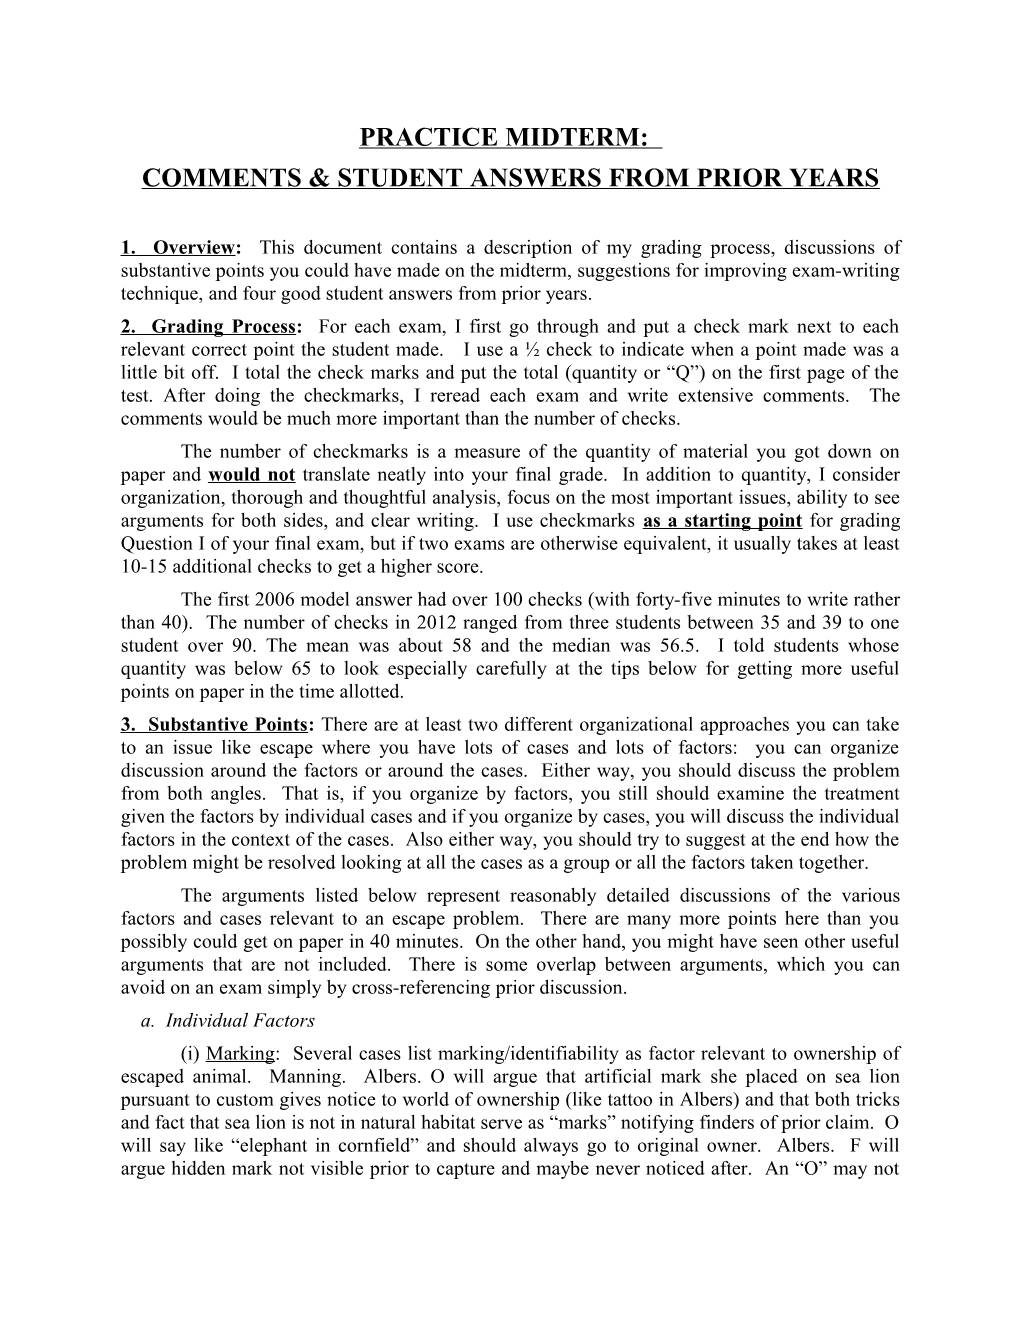 Comments & Student Answers from Prior Years